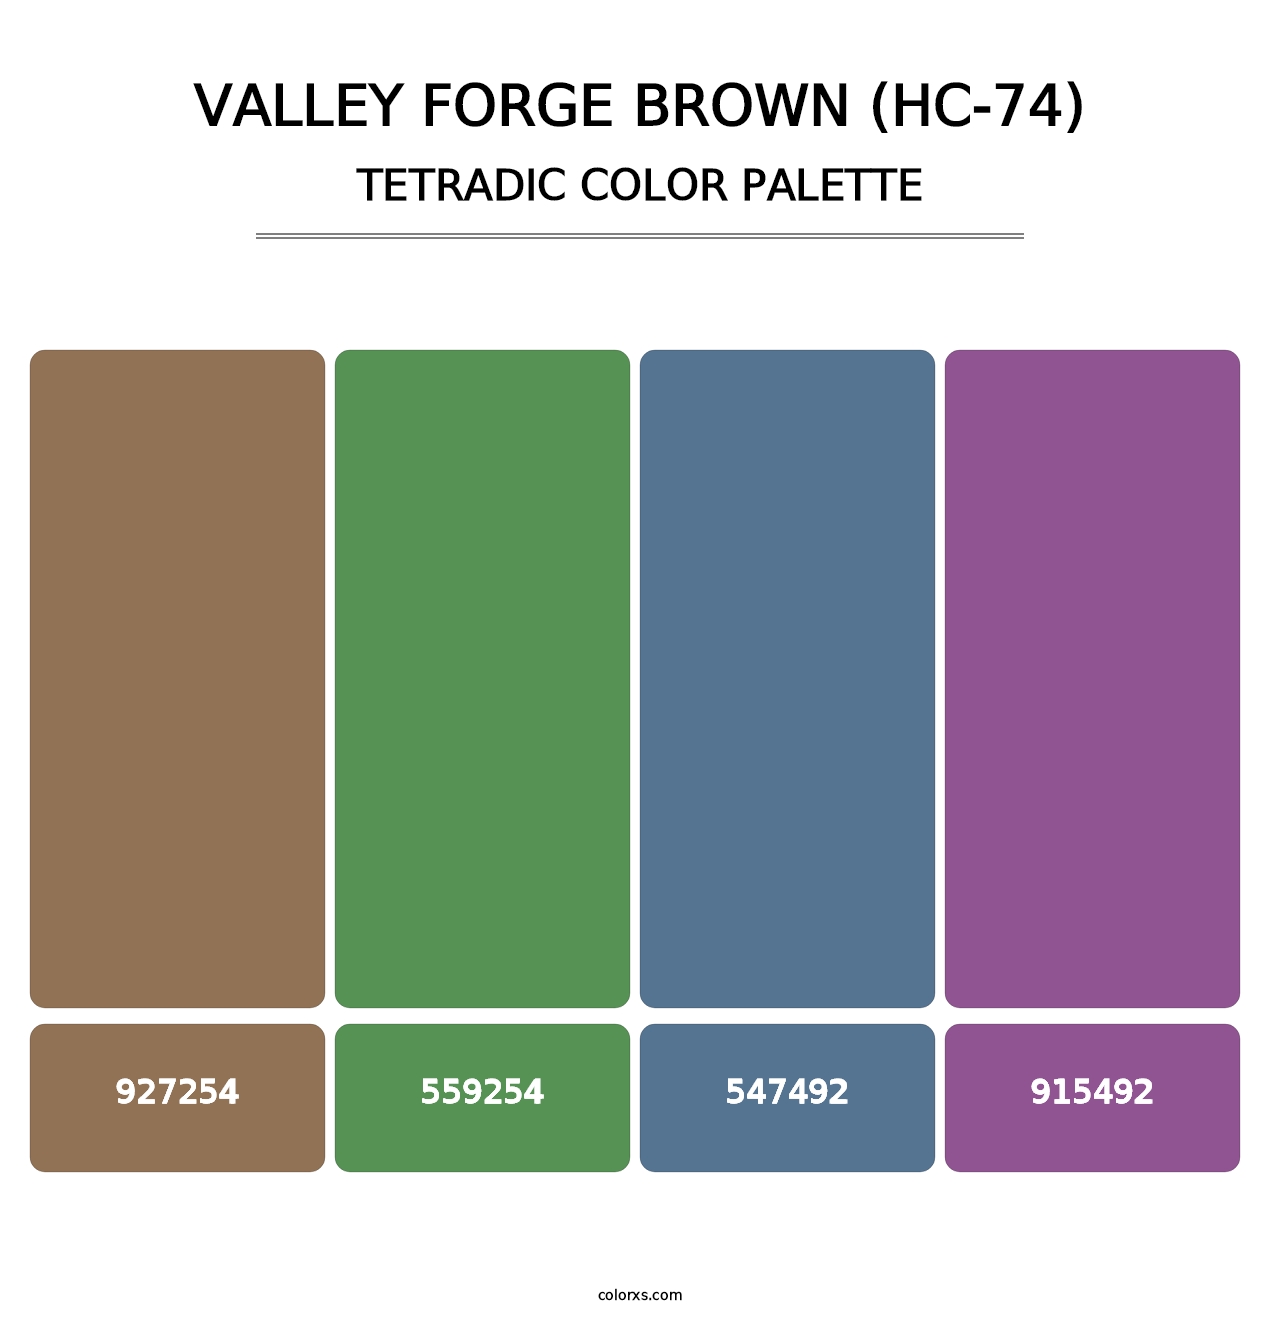 Valley Forge Brown (HC-74) - Tetradic Color Palette